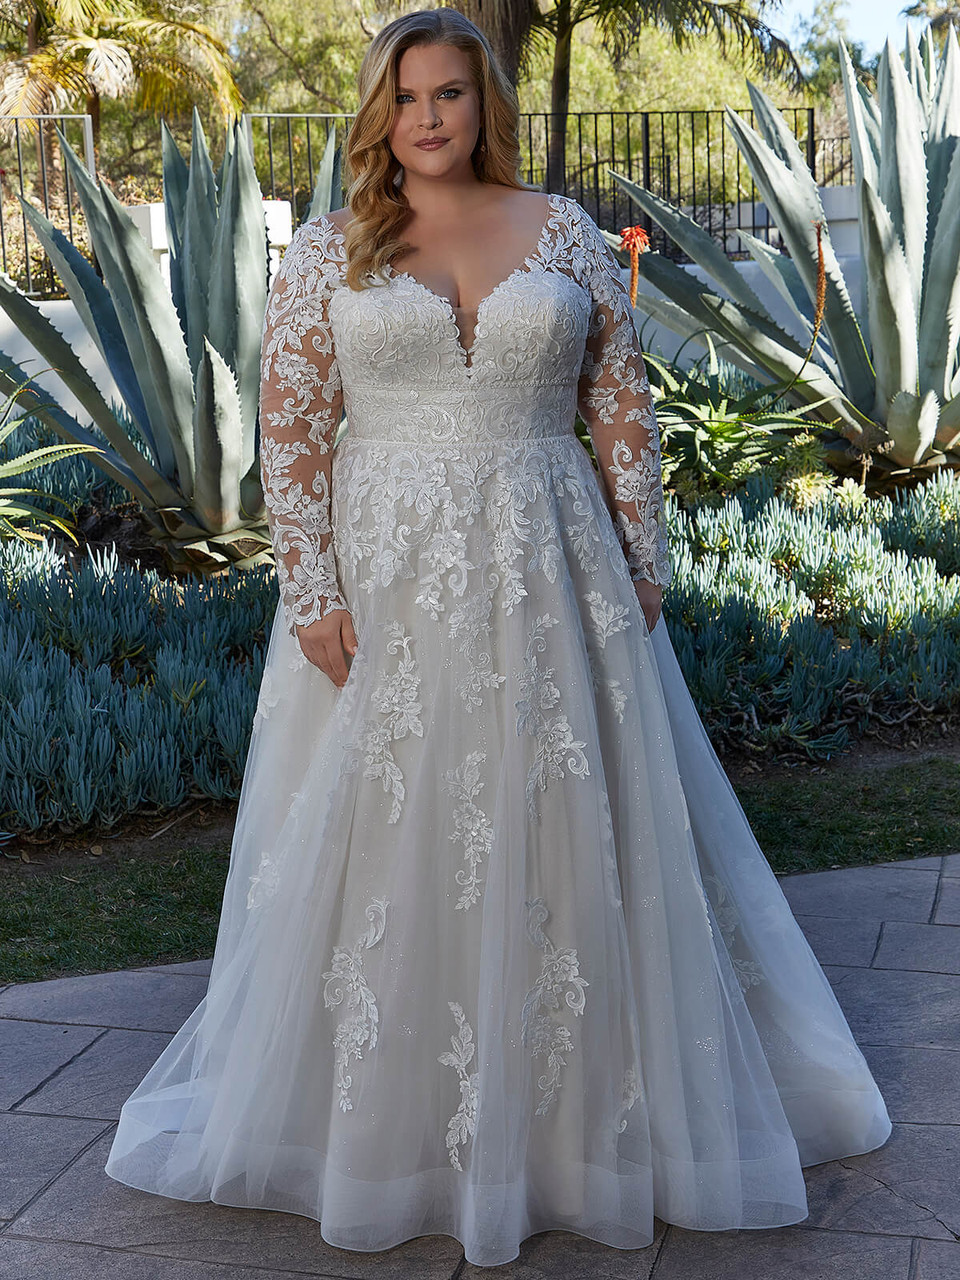 Julietta Plus Size Bridal Gown by Morilee Lenora 3395 - DimitraDesigns.com